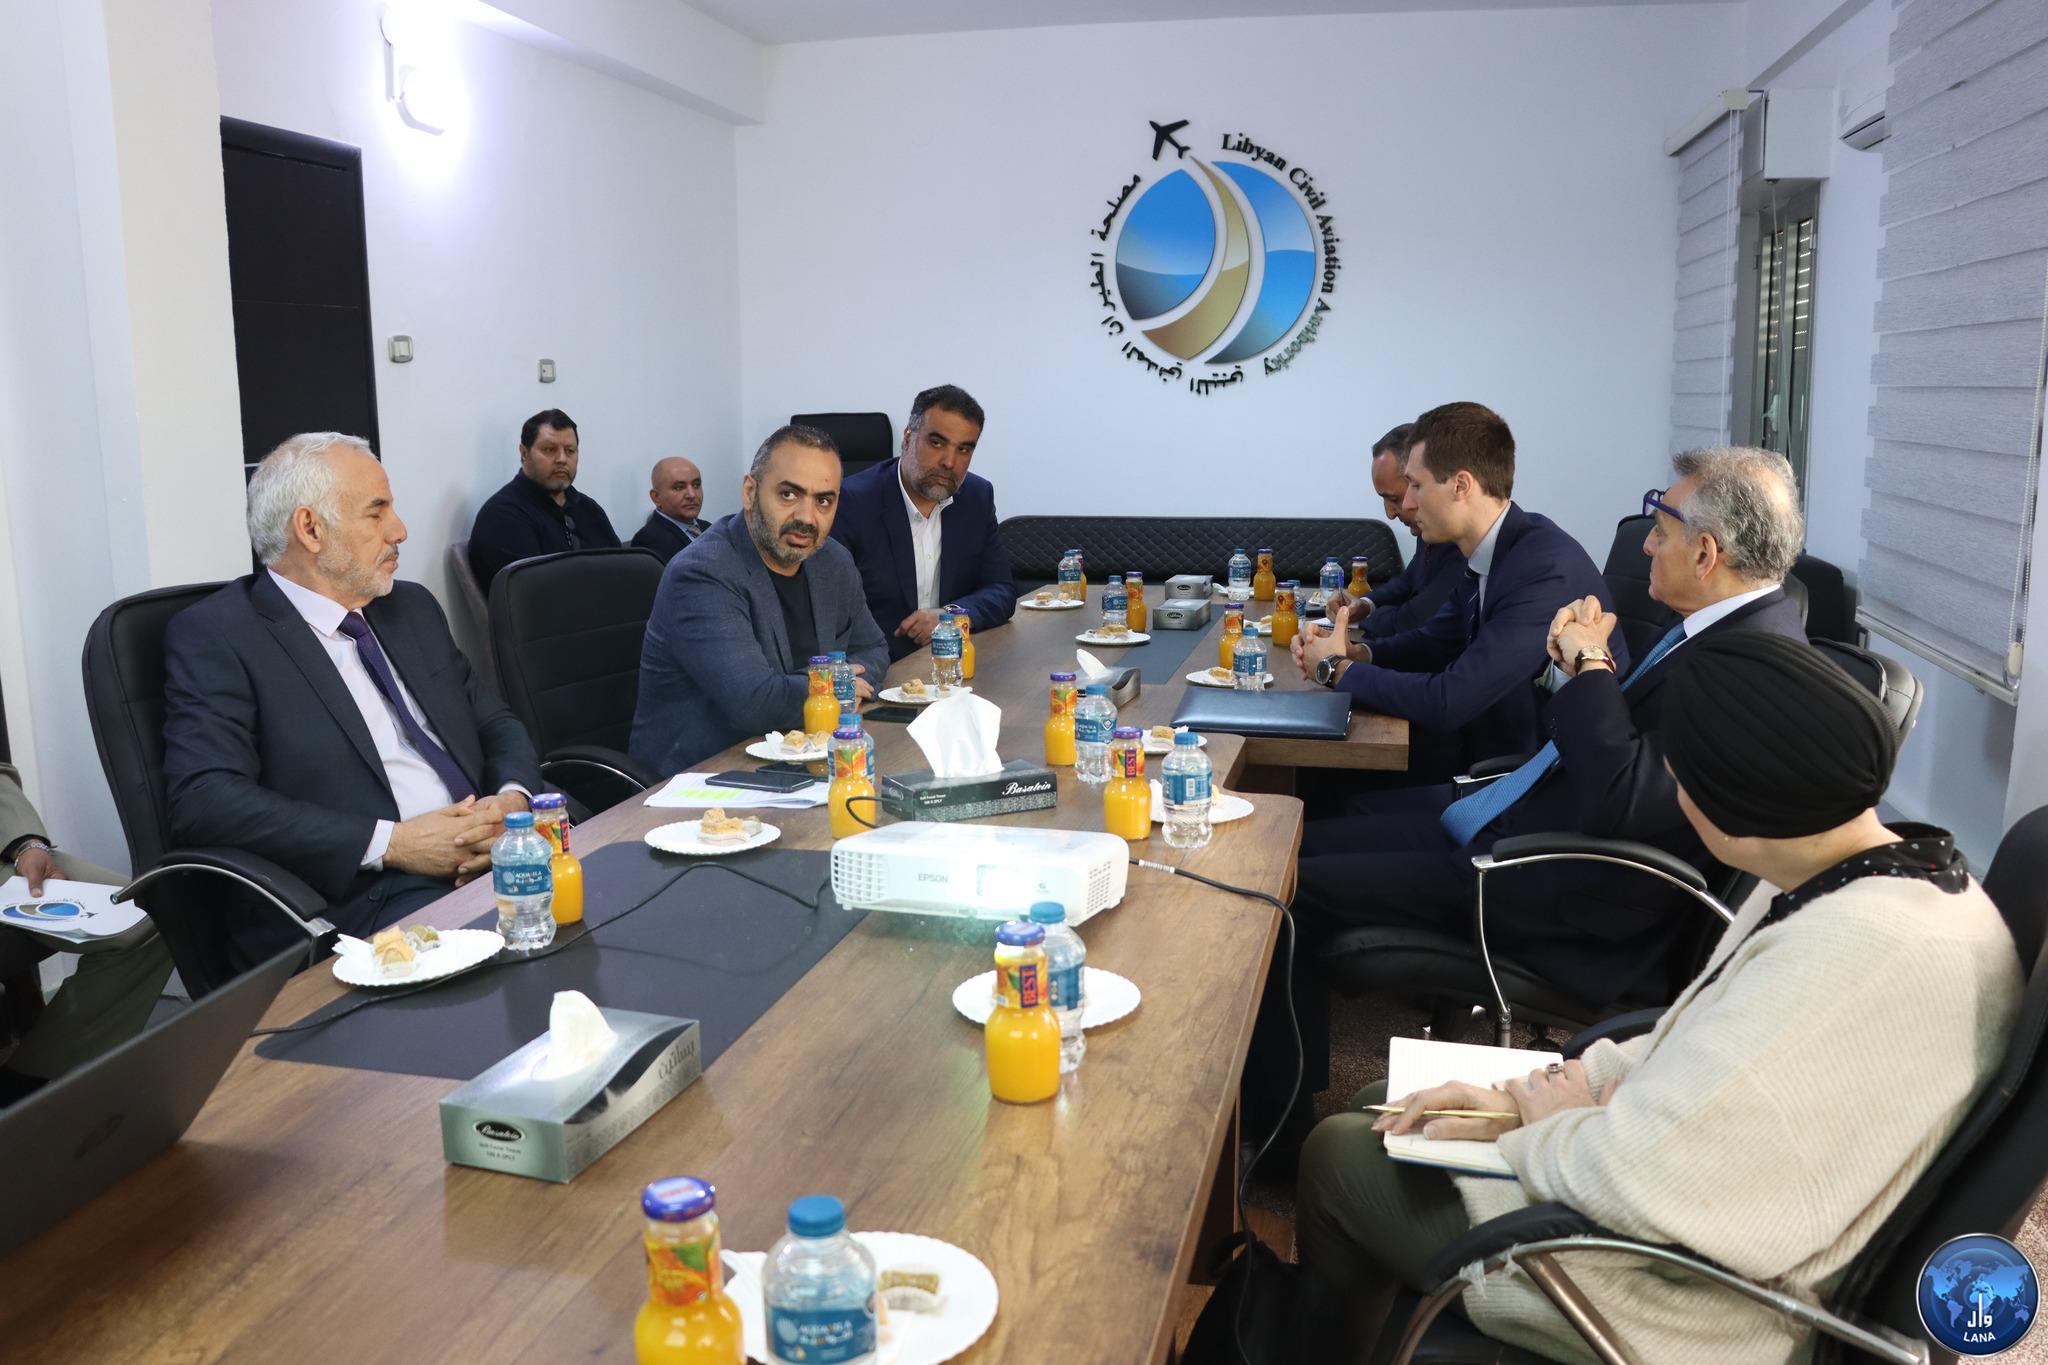 Libyan Civil Aviation Authority discusses with the Italian Ambassador the restrictions of the Italian Government on Libyan airlines.